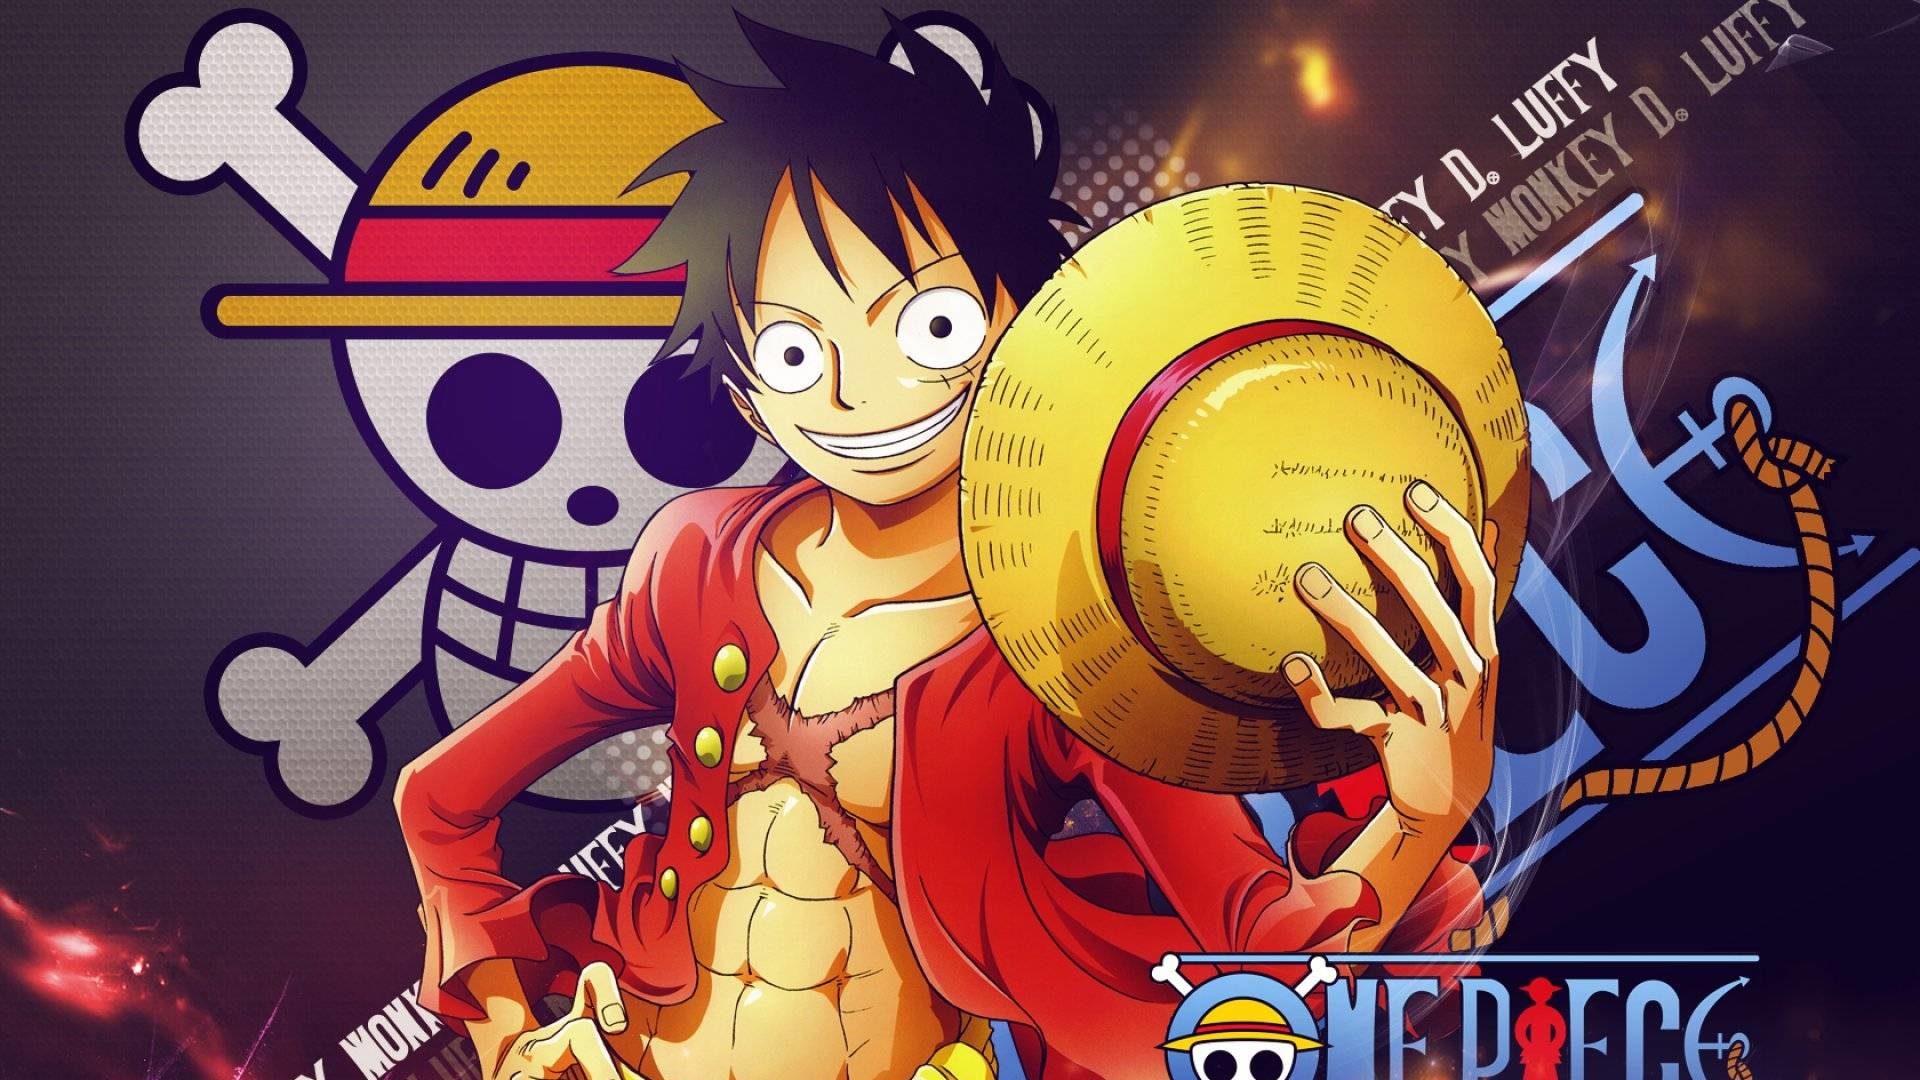 One Piece Episode 928 Release Date, Plot Spoilers and Ways to Watch Online the Anime for Free